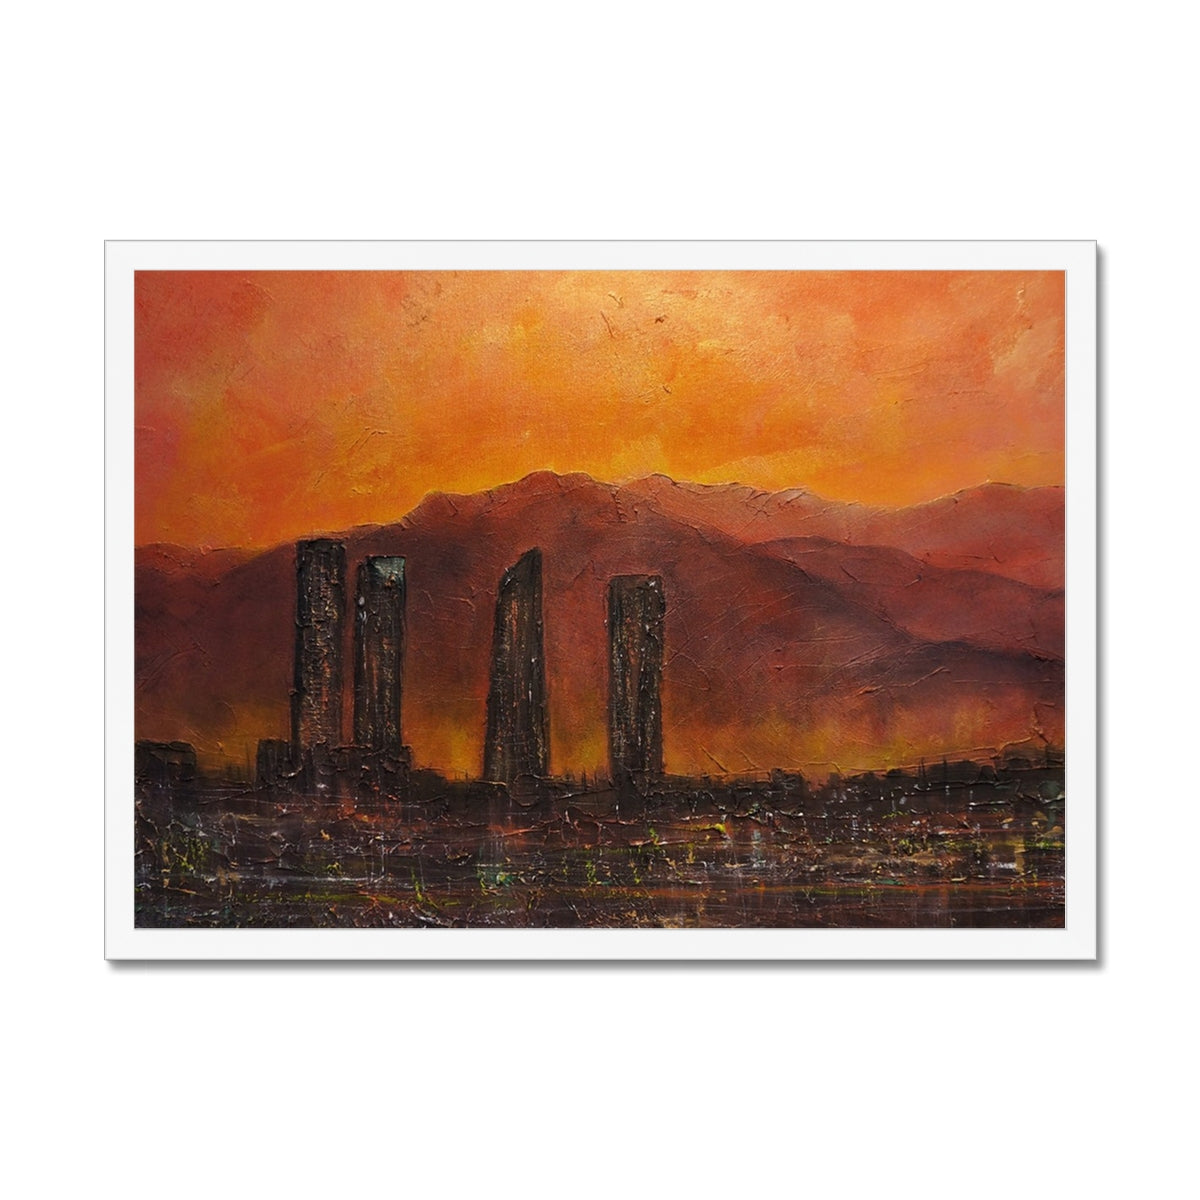 Madrid Dusk Painting | Framed Prints From Scotland-Framed Prints-World Art Gallery-A2 Landscape-White Frame-Paintings, Prints, Homeware, Art Gifts From Scotland By Scottish Artist Kevin Hunter